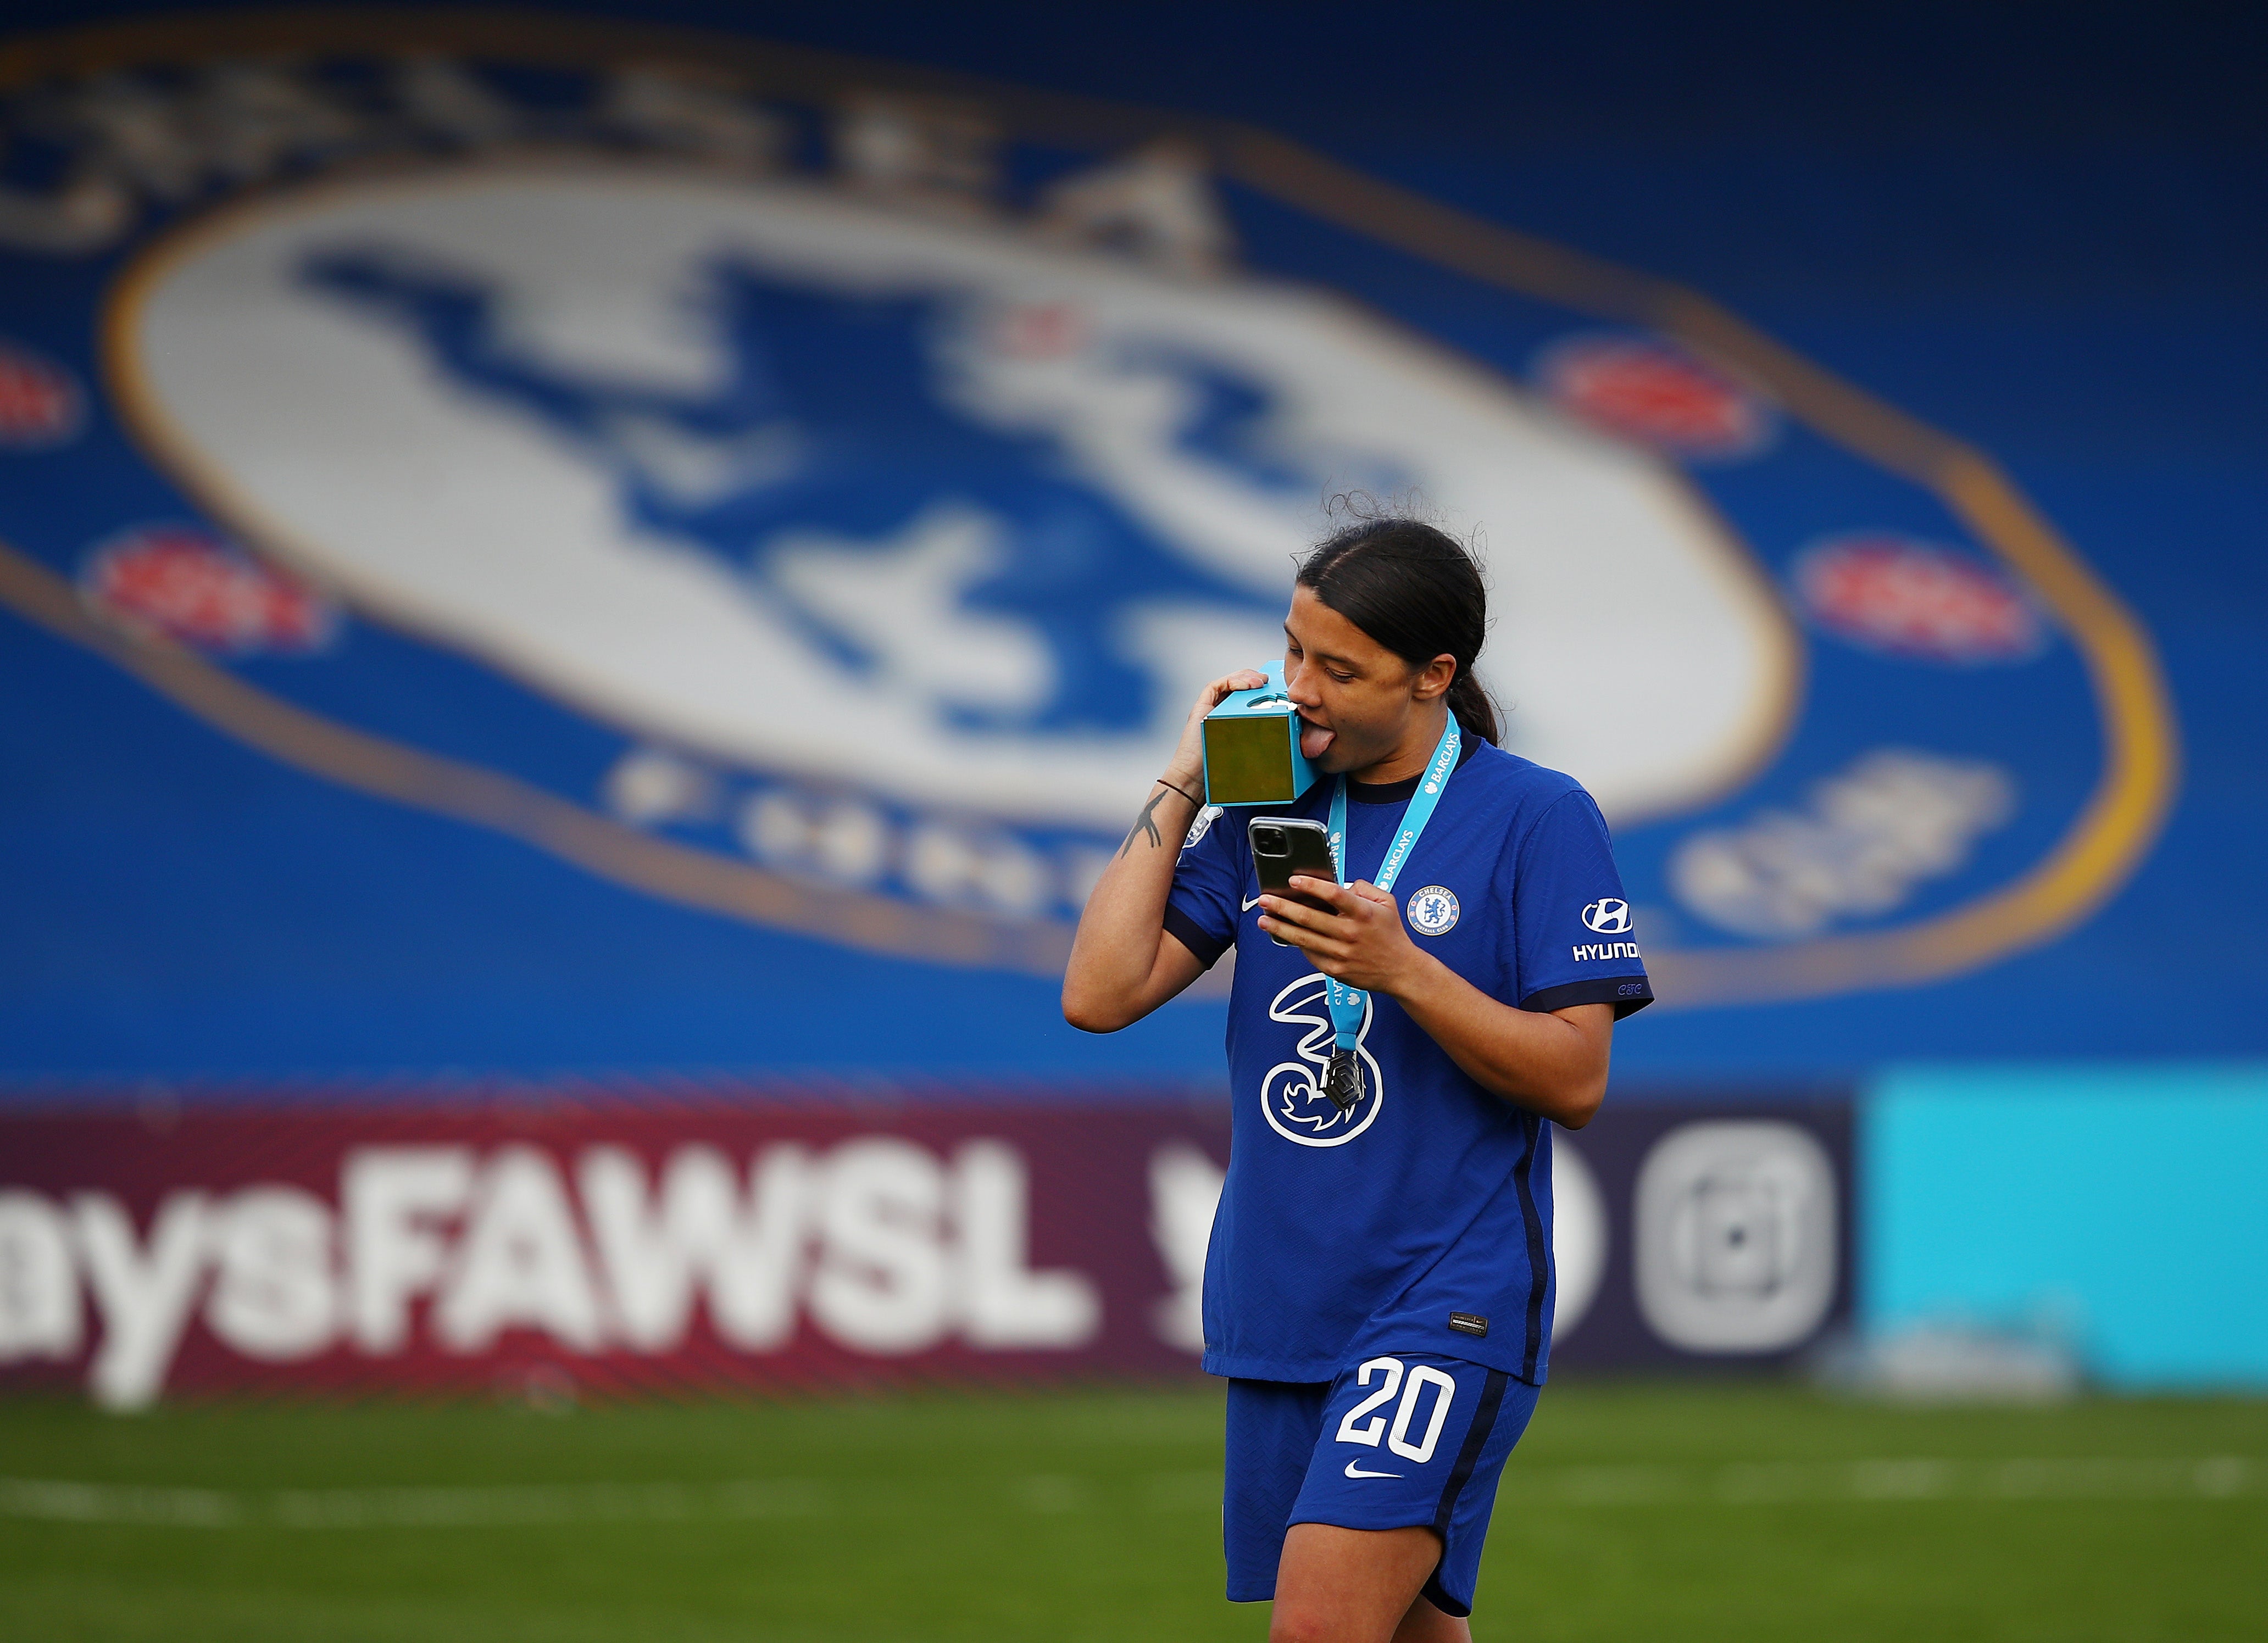 Chelsea’s Sam Kerr with the Super League Golden Boot